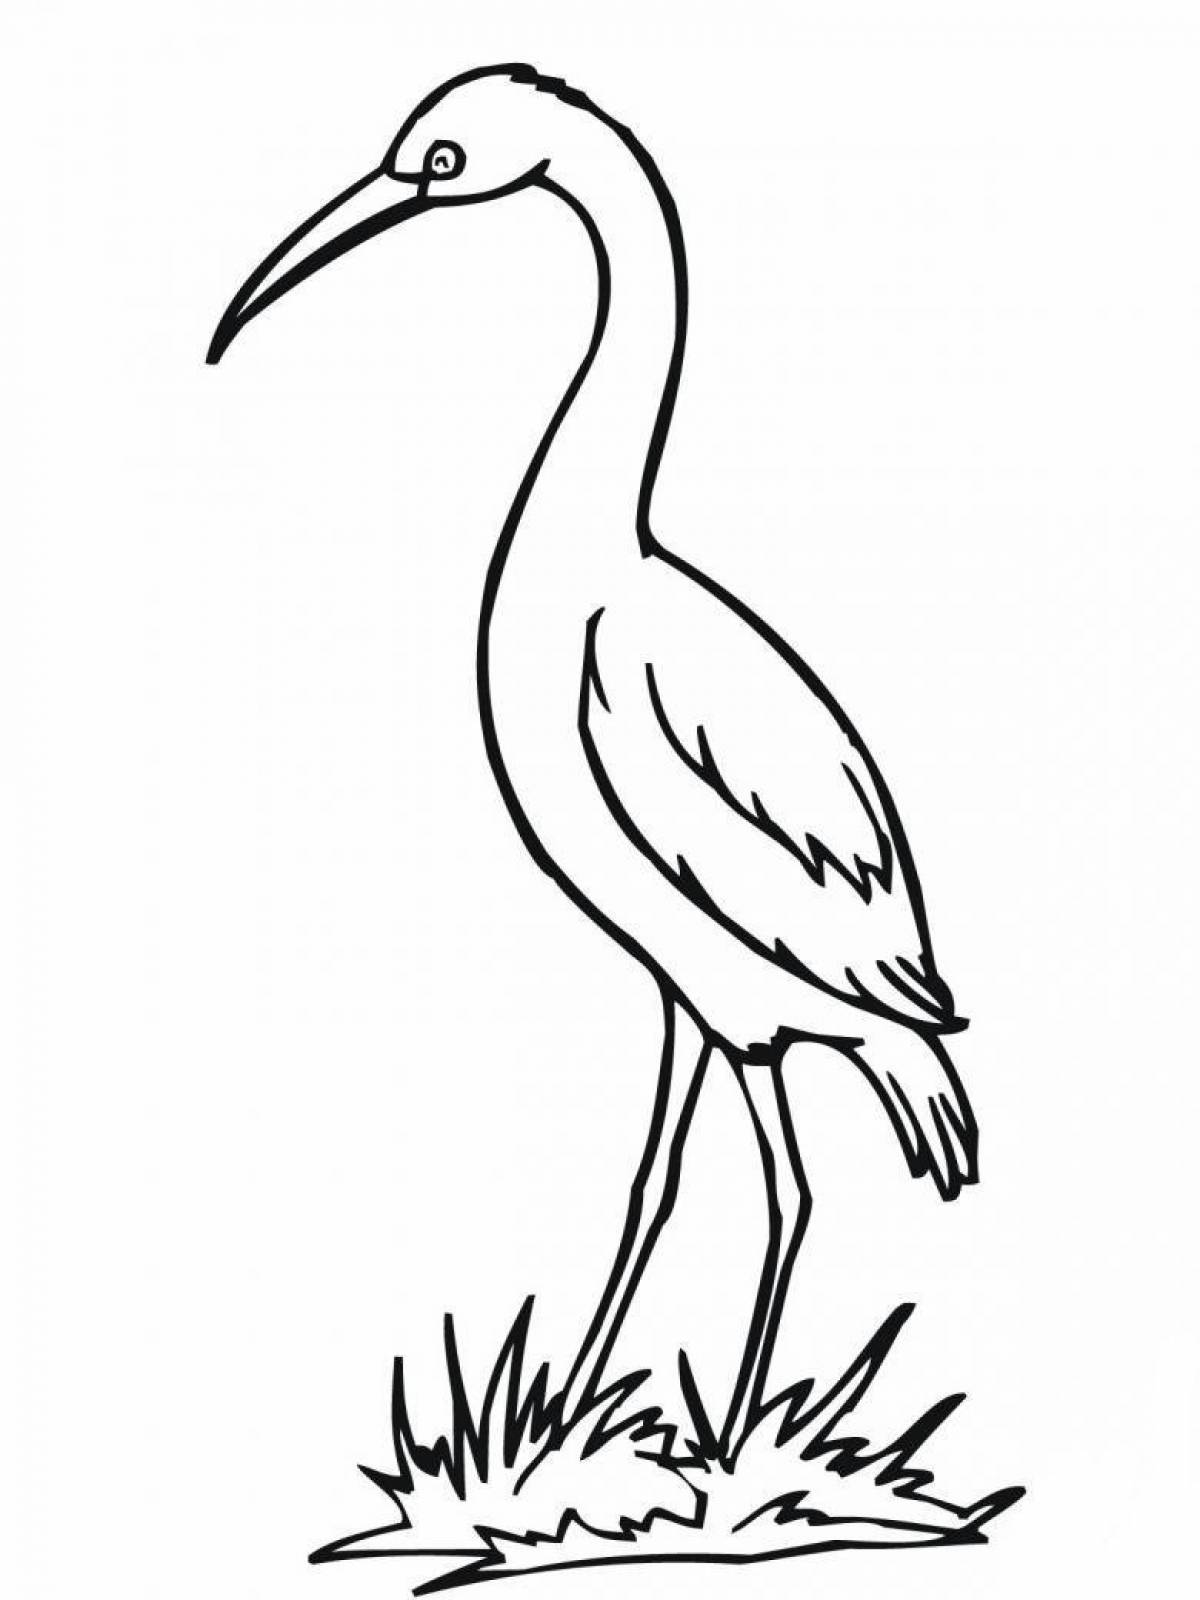 Living heron coloring pages for kids